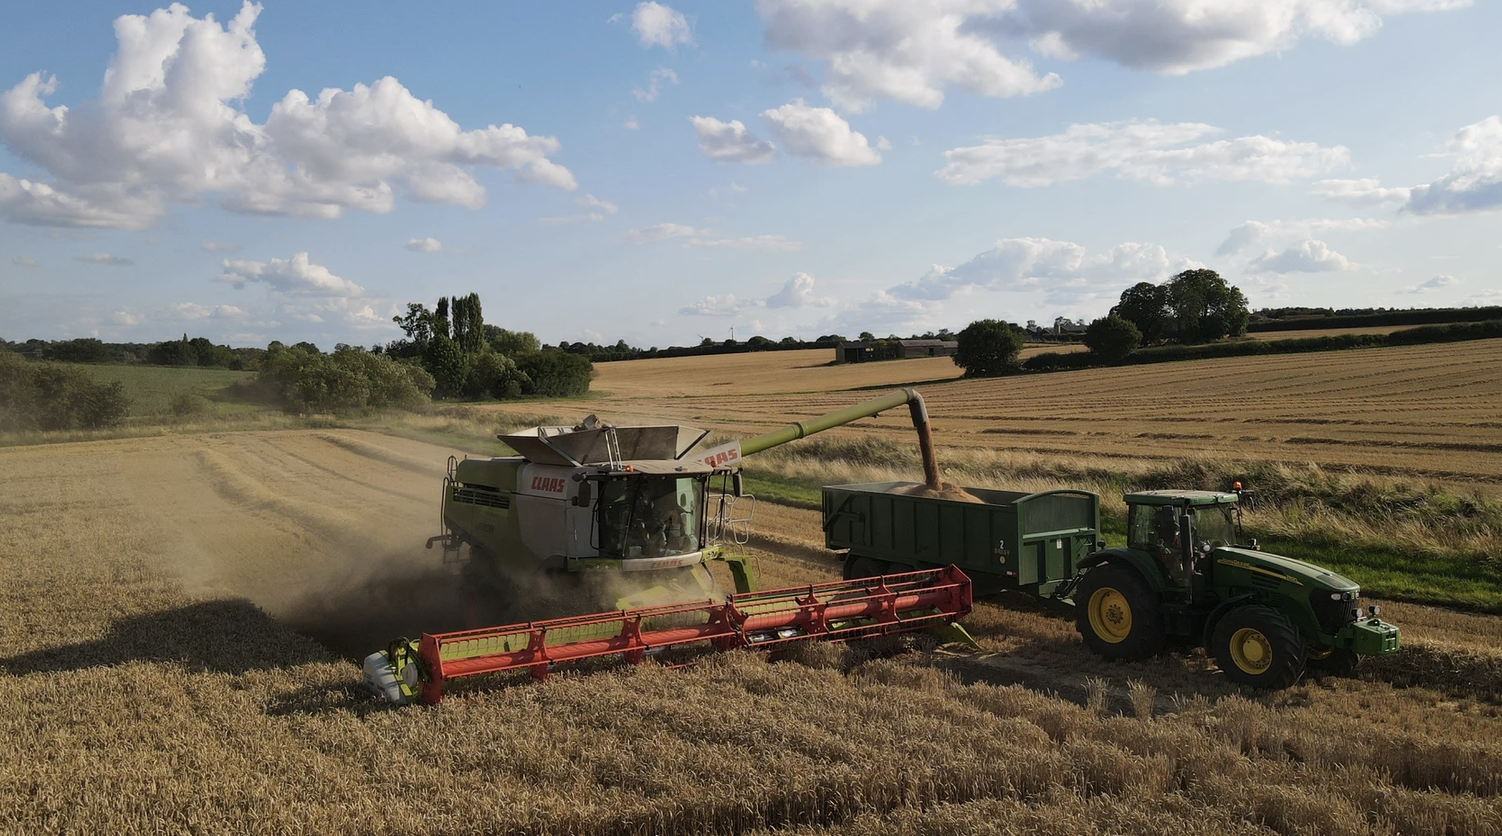 Combine harvester and tractor in field of wheat